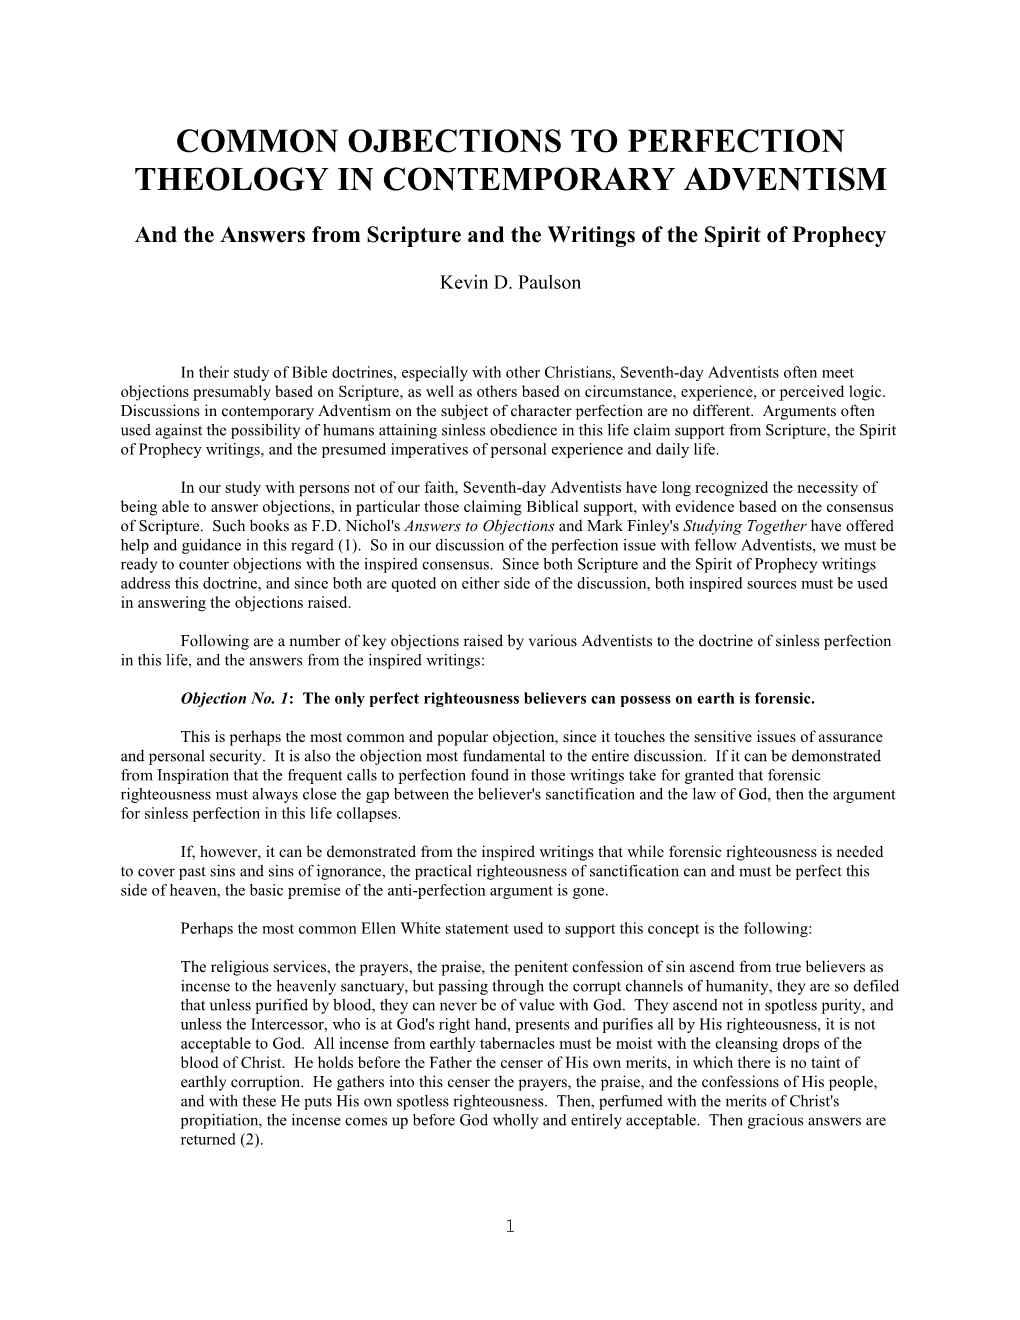 Common Ojbections to Perfection Theology in Contemporary Adventism